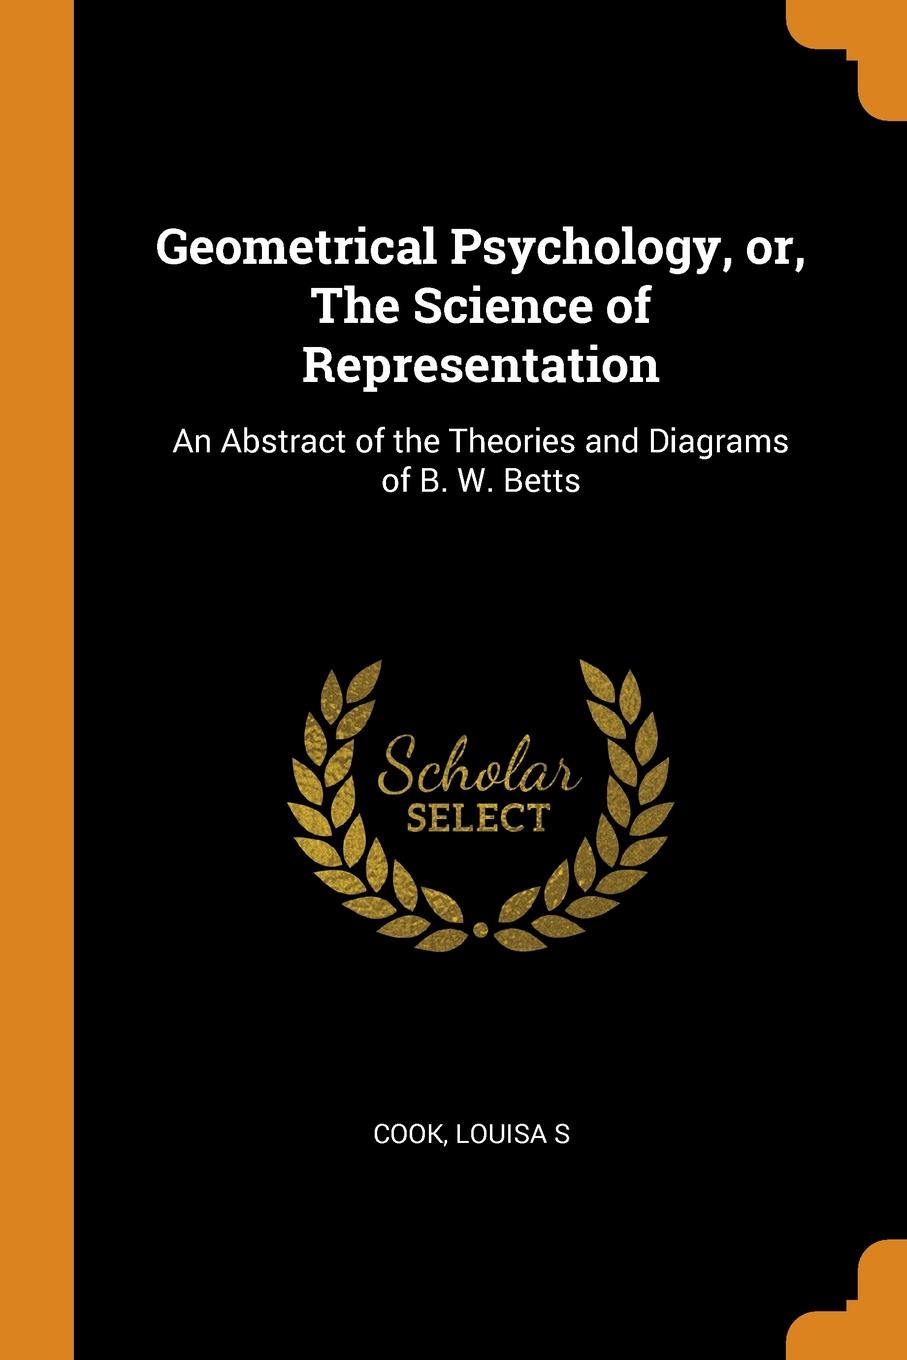 Geometrical Psychology, or, The Science of Representation. An Abstract of the Theories and Diagrams of B. W. Betts